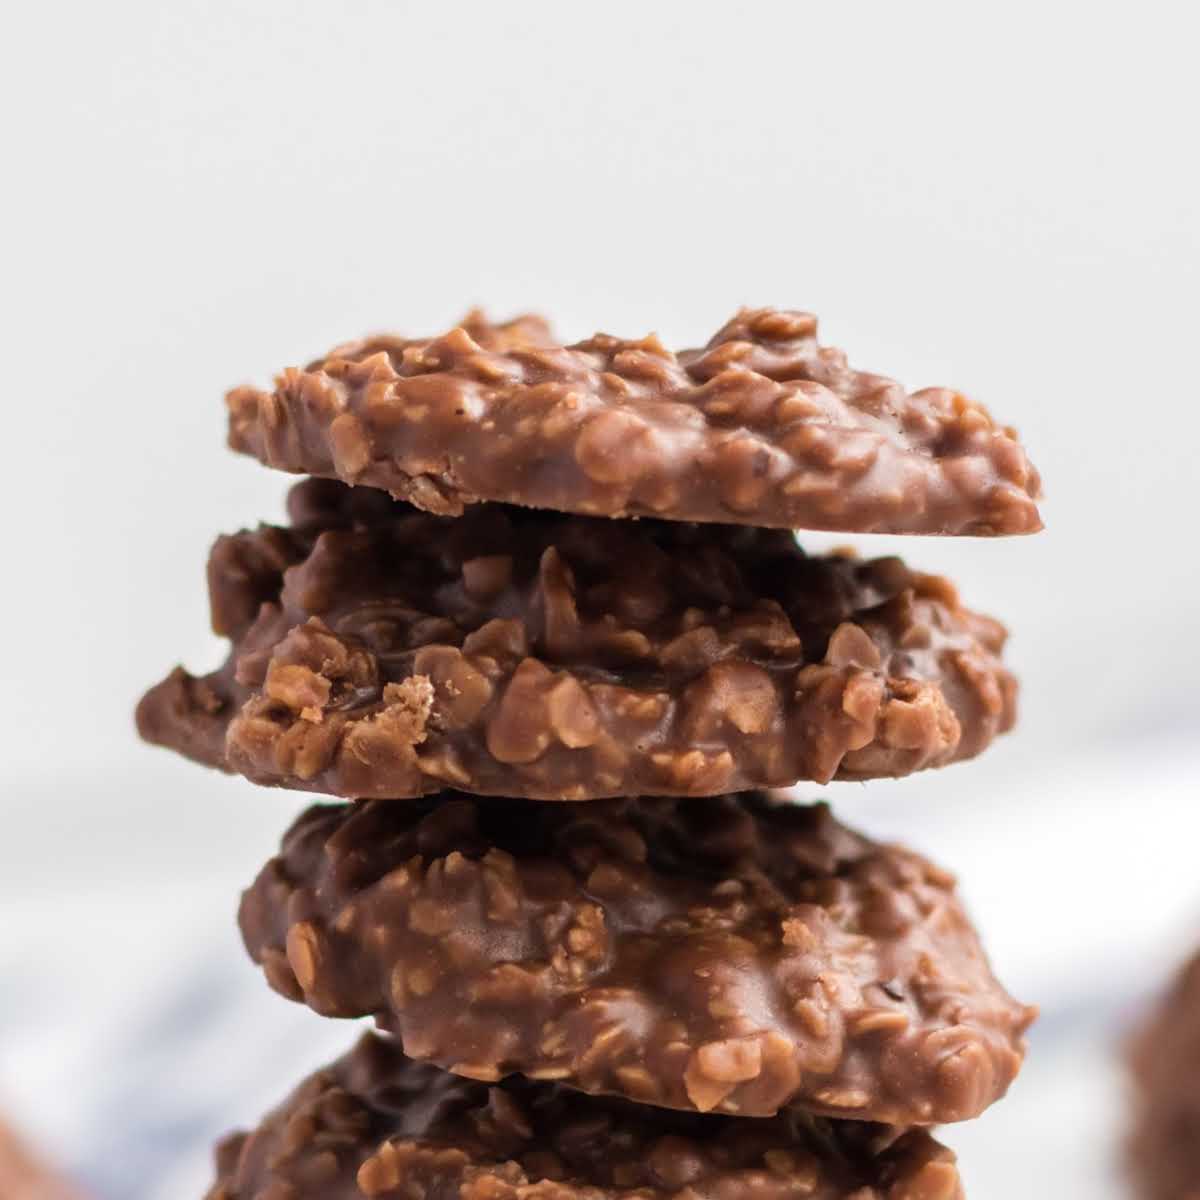 Chocolate Peanut Butter No Bake Cookies Recipe pic picture